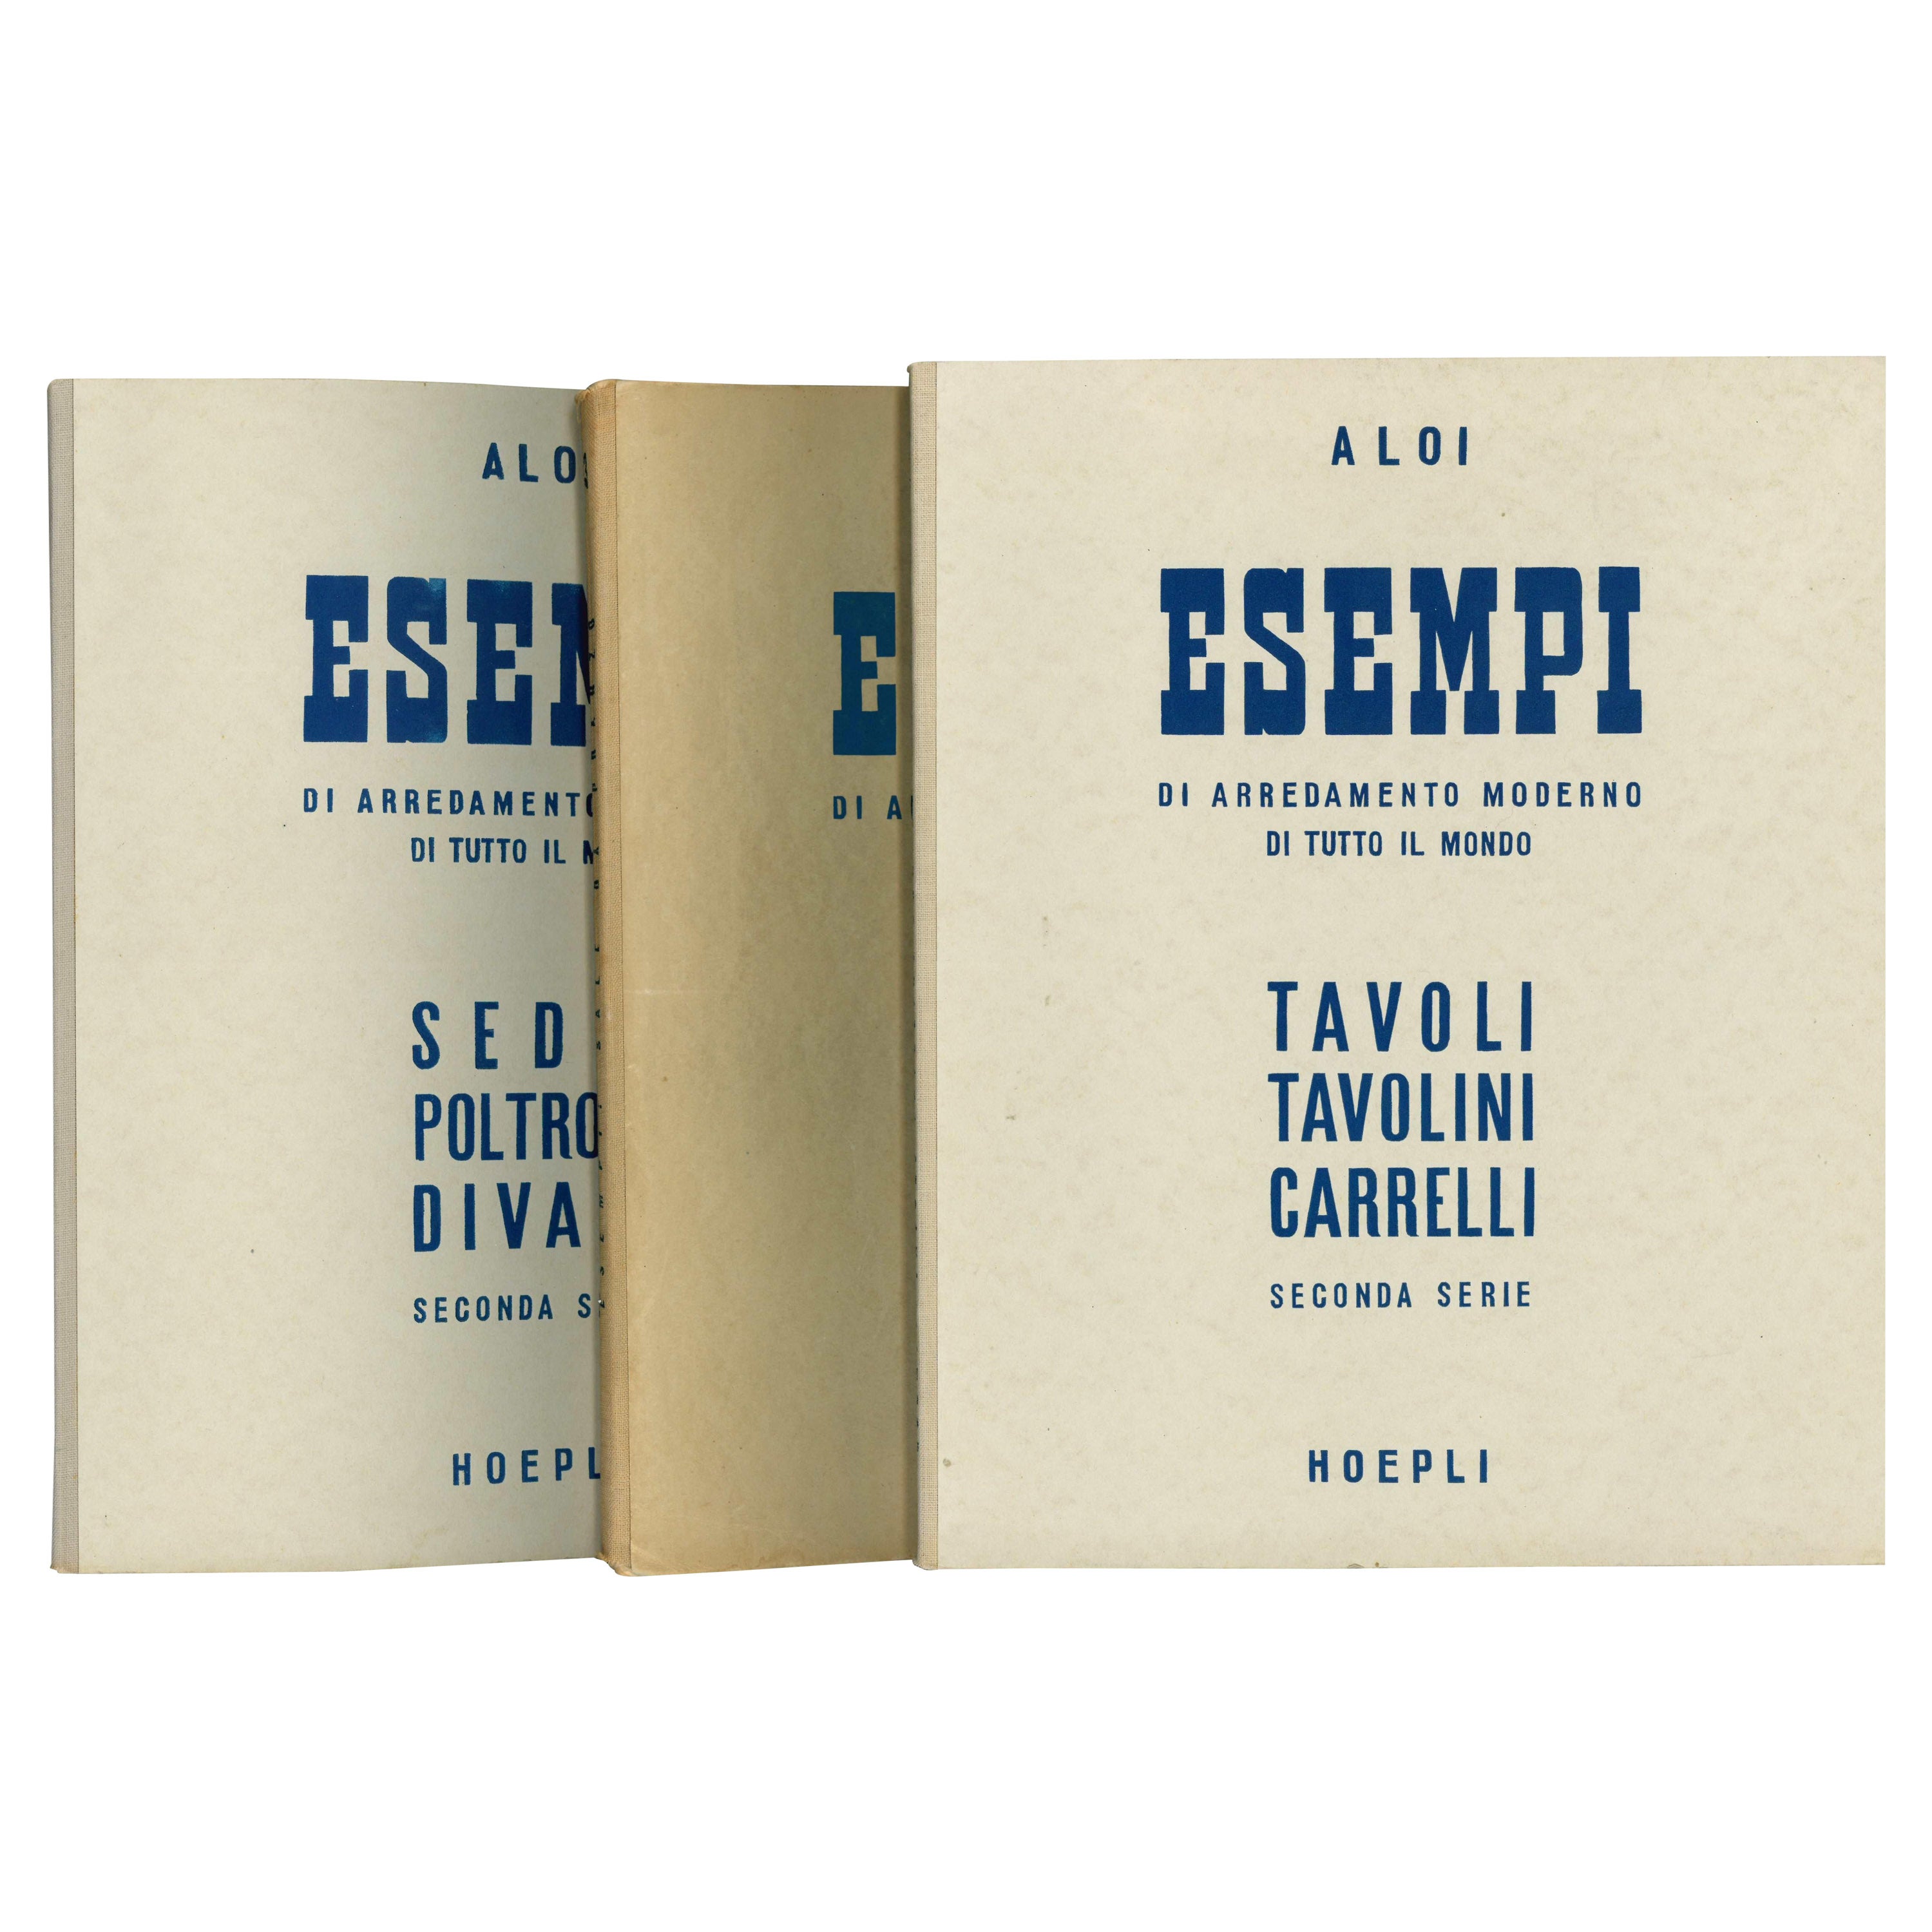 3 Volumes of the Robert Aloi, Esempi Furniture Series (Books) For Sale